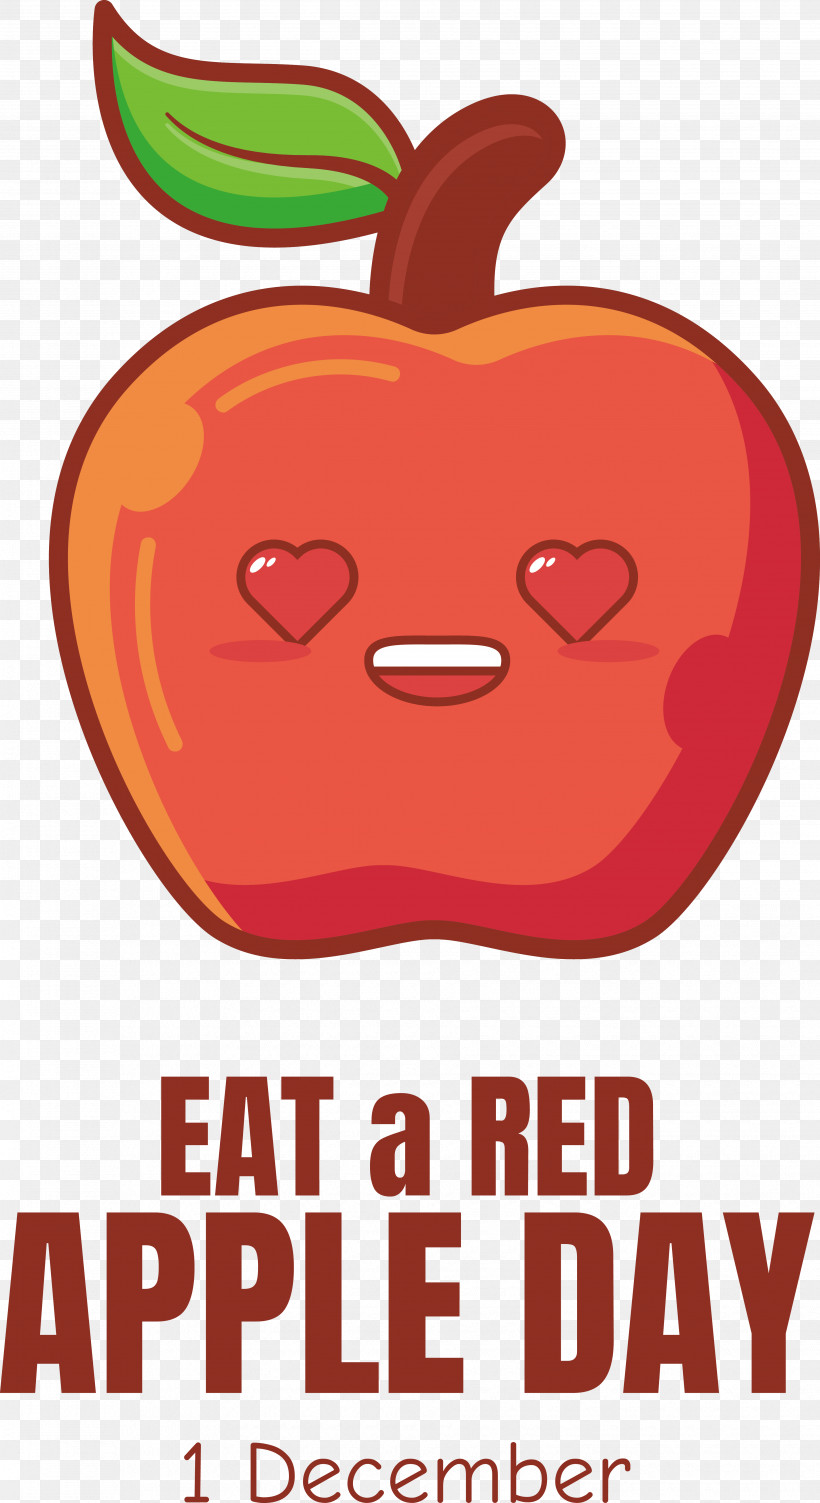 Eat A Red Apple Day Red Apple Fruit, PNG, 3712x6808px, Eat A Red Apple Day, Fruit, Red Apple Download Free